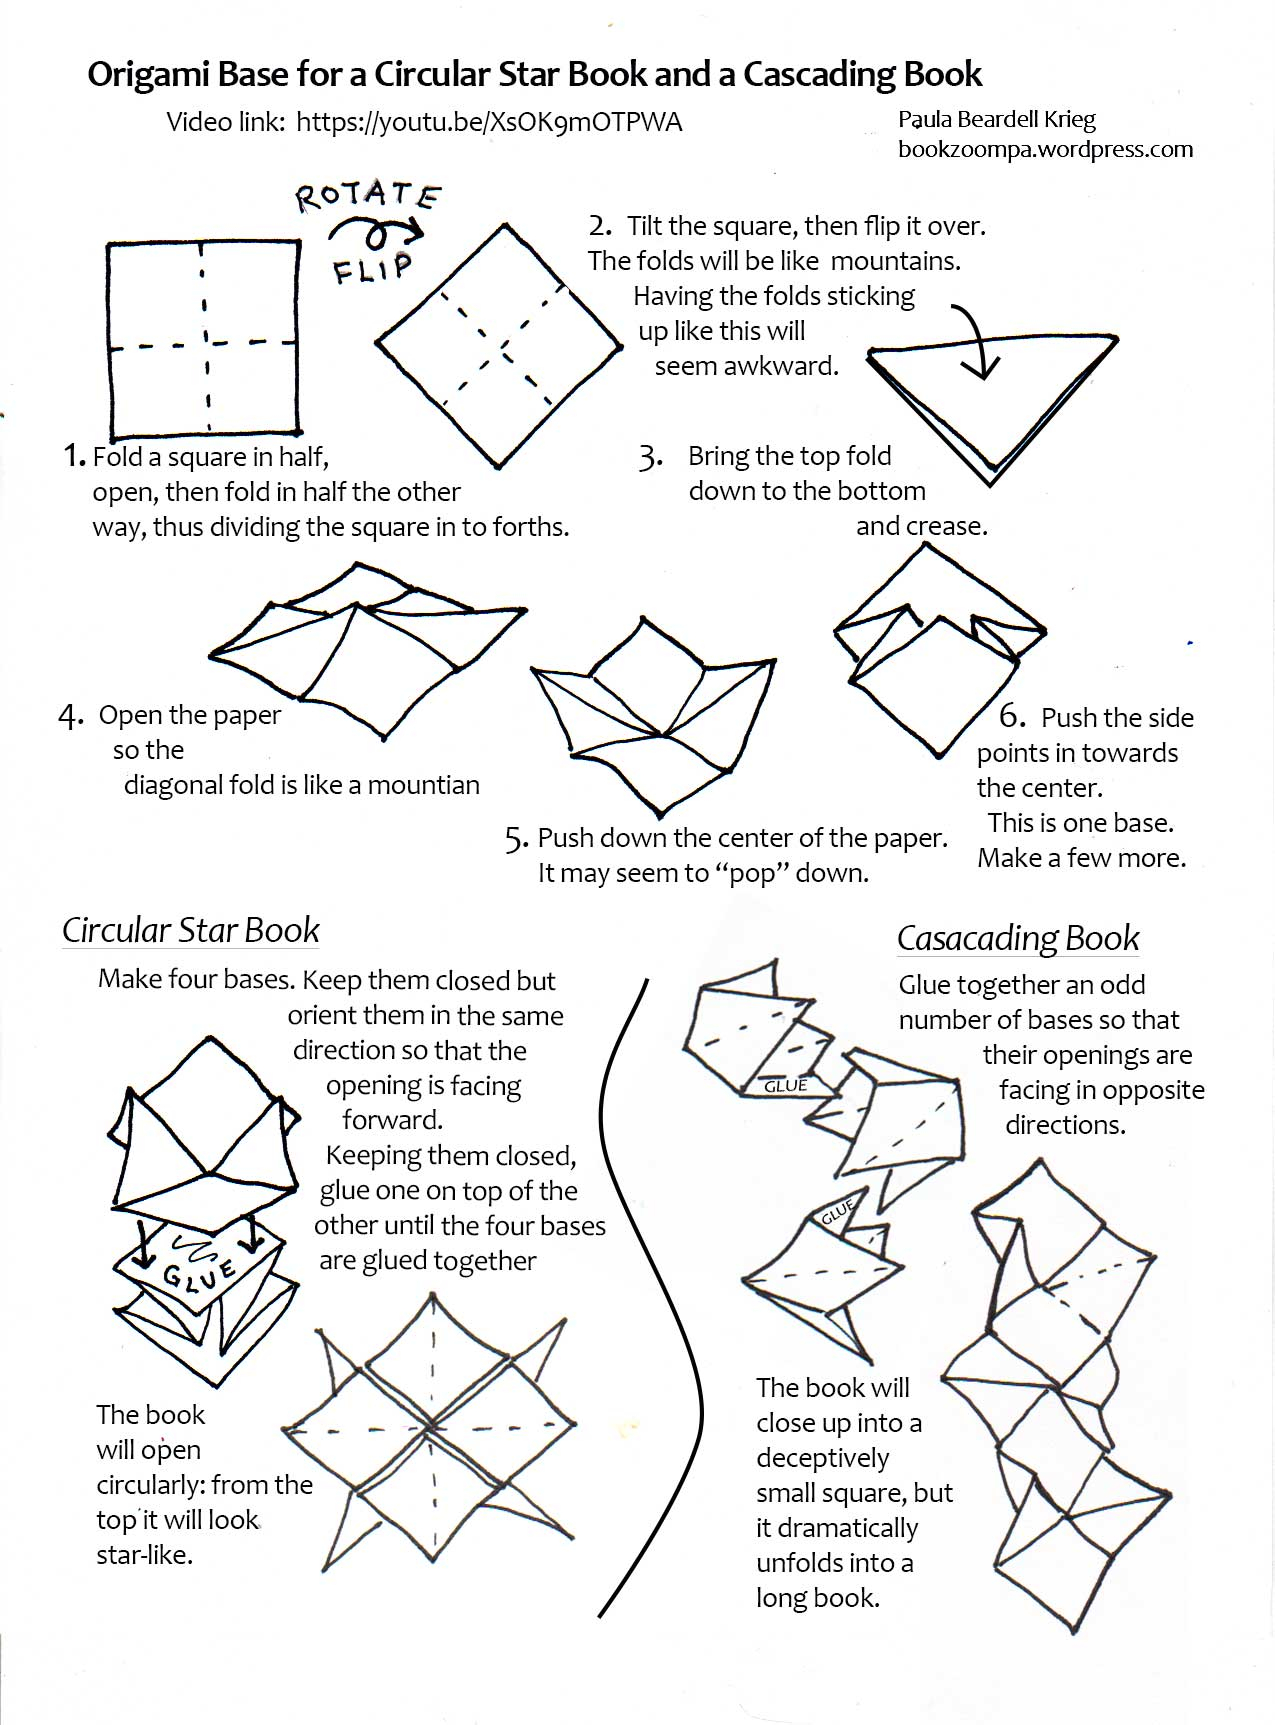 How To Make An Origami Booklet Books Made From One Sheet Of Folded Paper Playful Bookbinding And